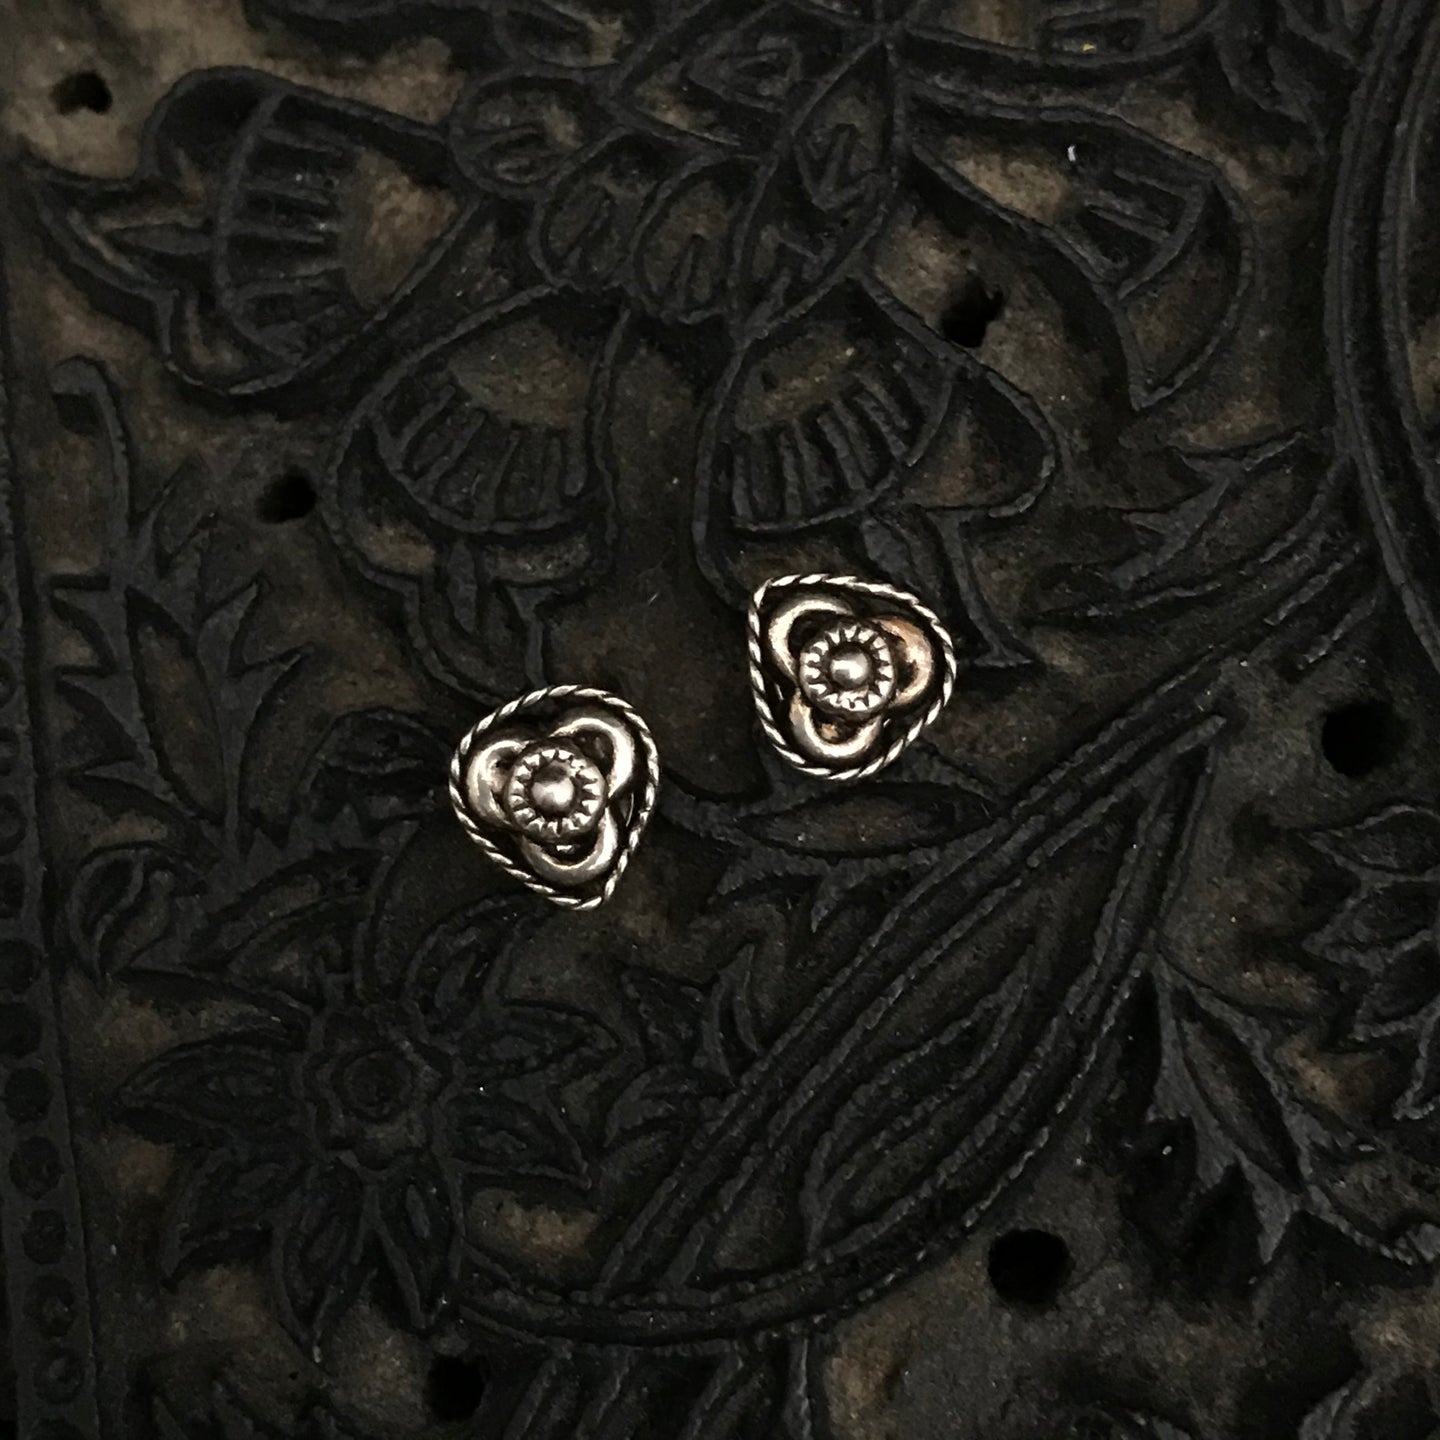 Crafted in 92.5 silver with a stunning gold polish, these Earrings feature a beautiful interpretation of the lotus flower. The intricate design showcases exceptional craftsmanship and adds a touch of elegance to any outfit. Elevate your style with these unique and timeless earrings.